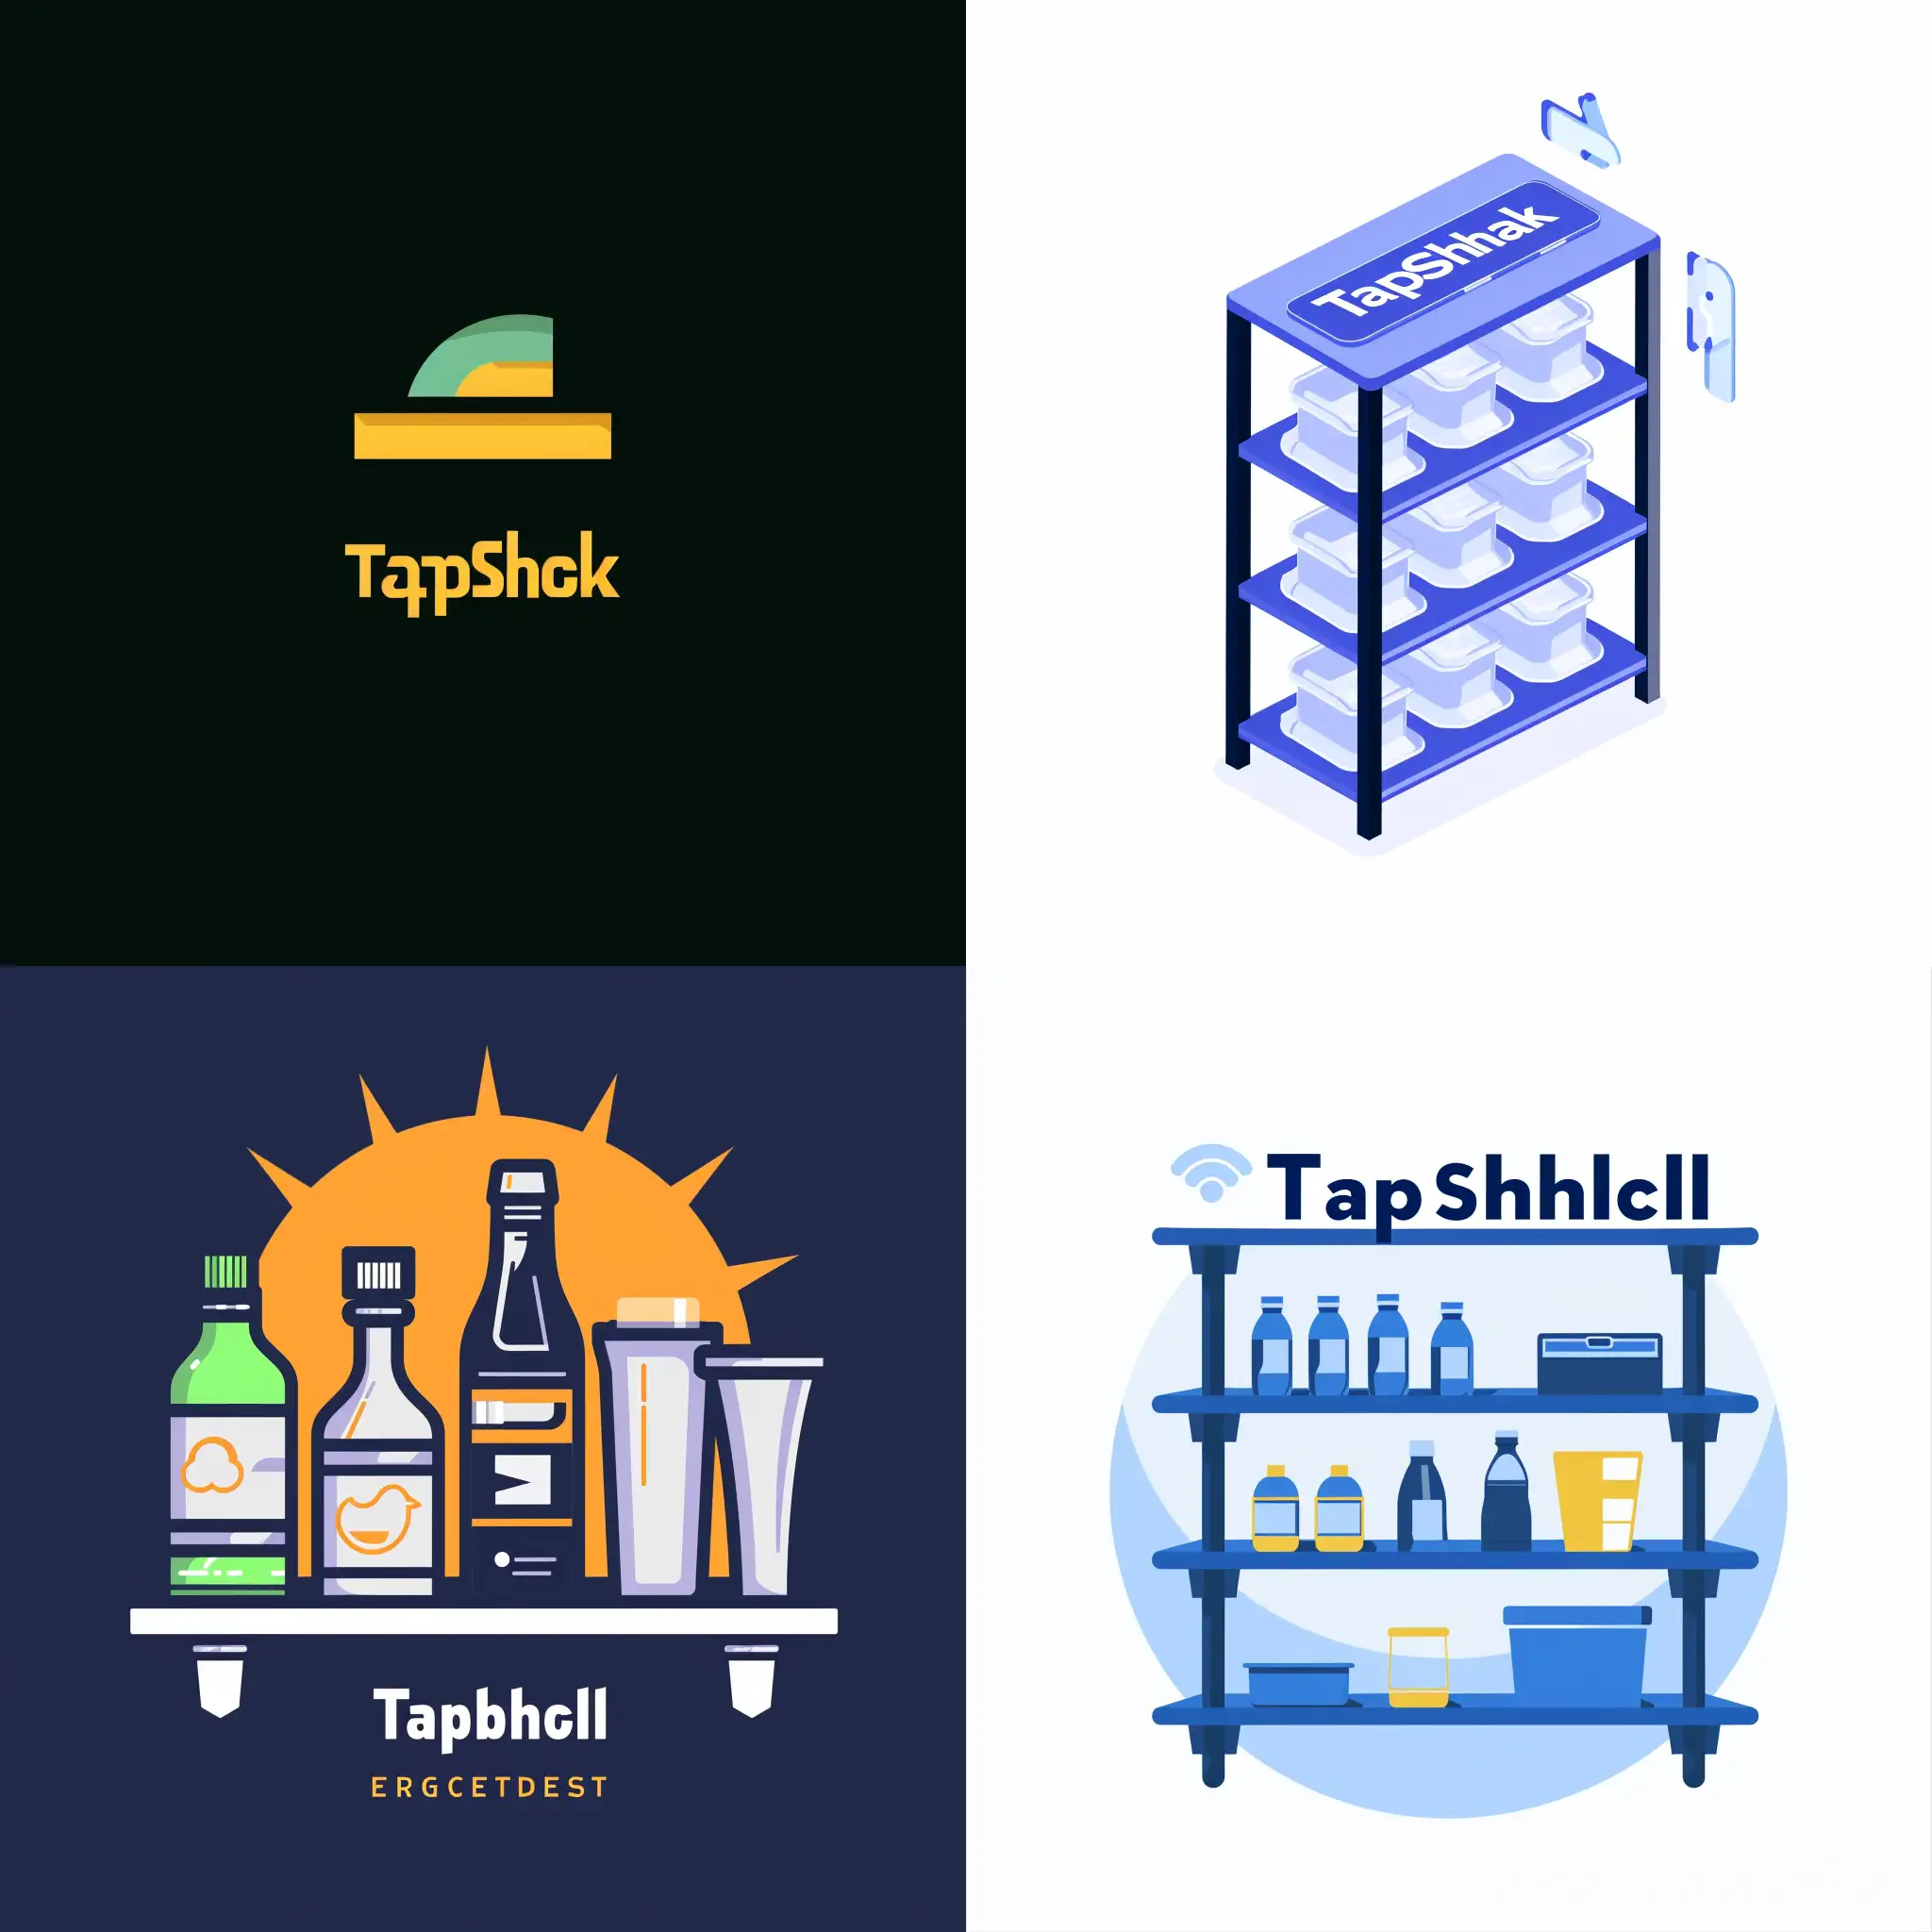 Create a logo or visual to promote "TapShelf," a revolutionary smart shelf that automates item addition and subtraction, simplifying inventory management. This innovation allows you to effectively track your stocks by automatically recording entries and exits. You can upload the file of your creation (accepted formats: jpg, png, svg). This step will help us better understand your creative process.